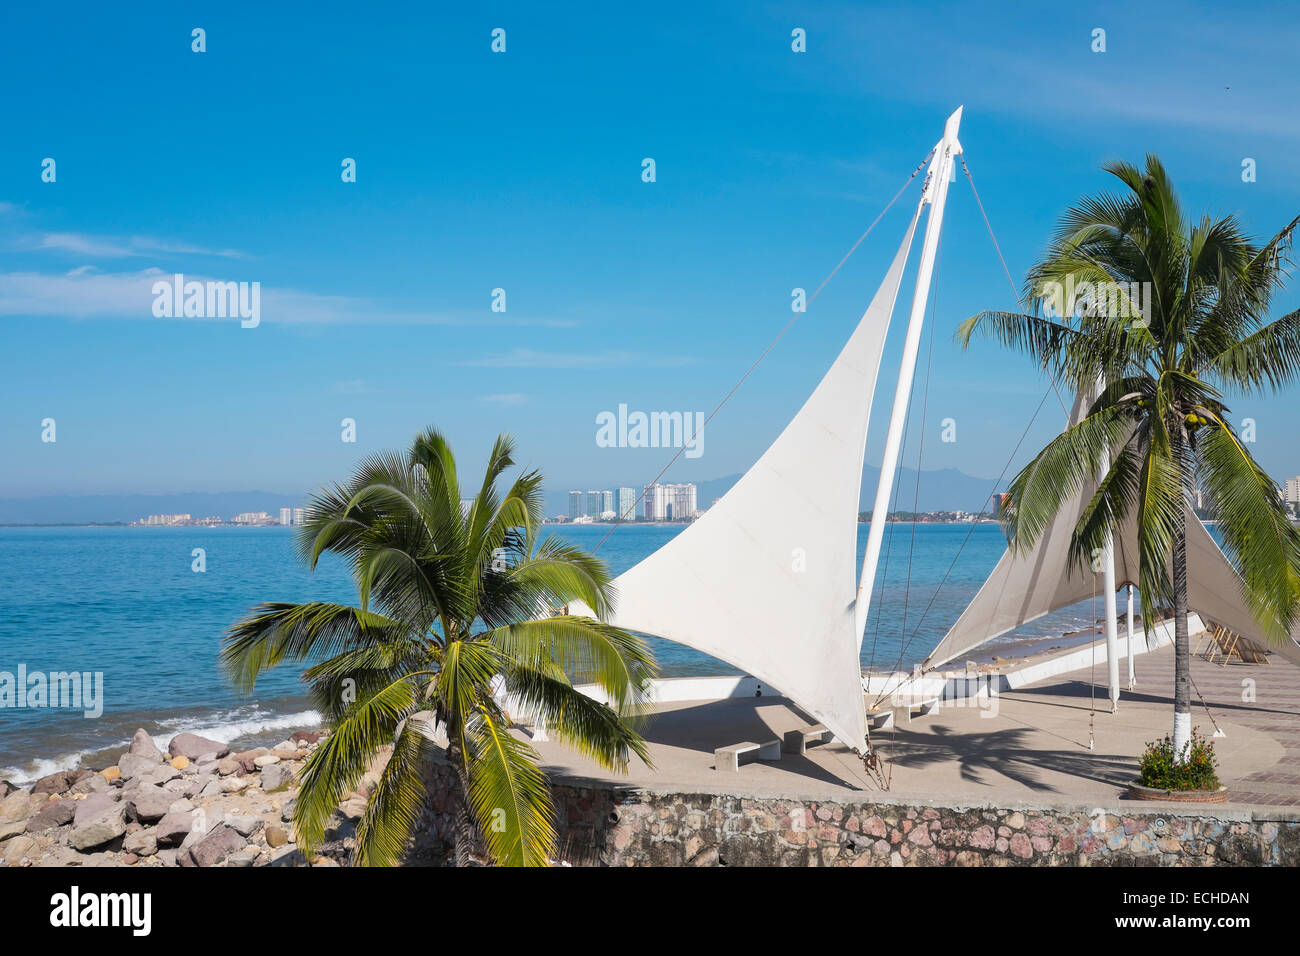 Set sail statue at the South end of Malecon pedestrian boulevard in Puerto Vallarta, Jalisco, Mexico Stock Photo